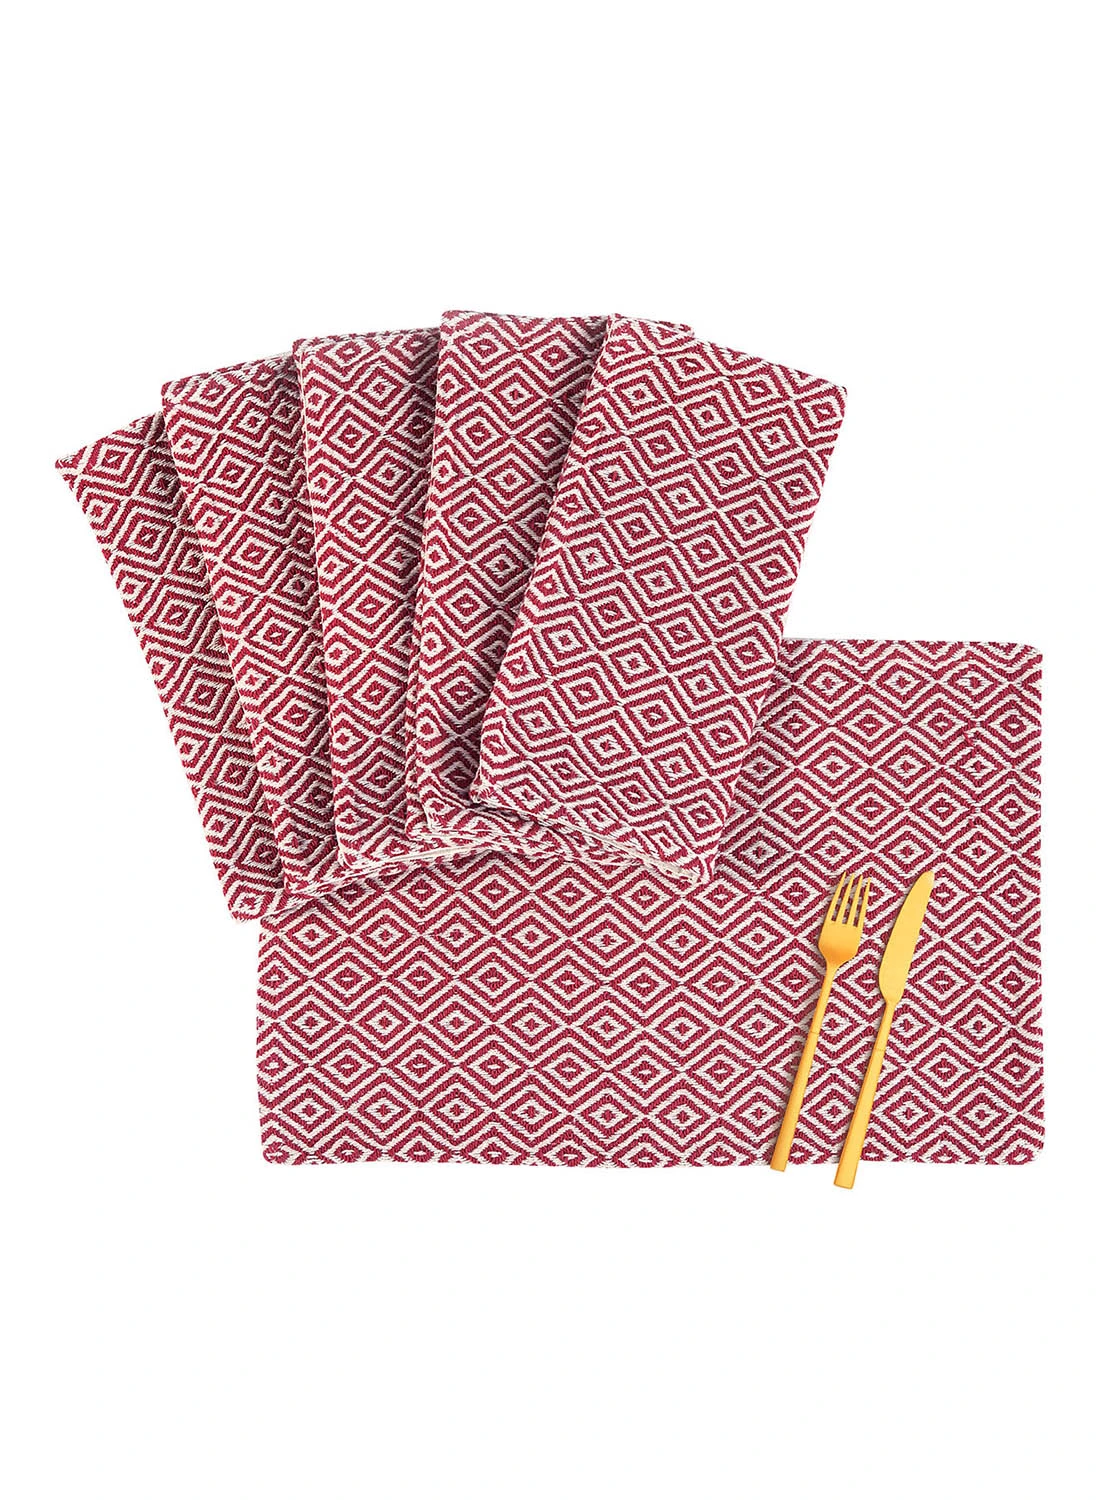 Amal 6 Piece Placemat Set For Dining Table - Washable Dish Pad - Table Mat - Table Linen - Maroon